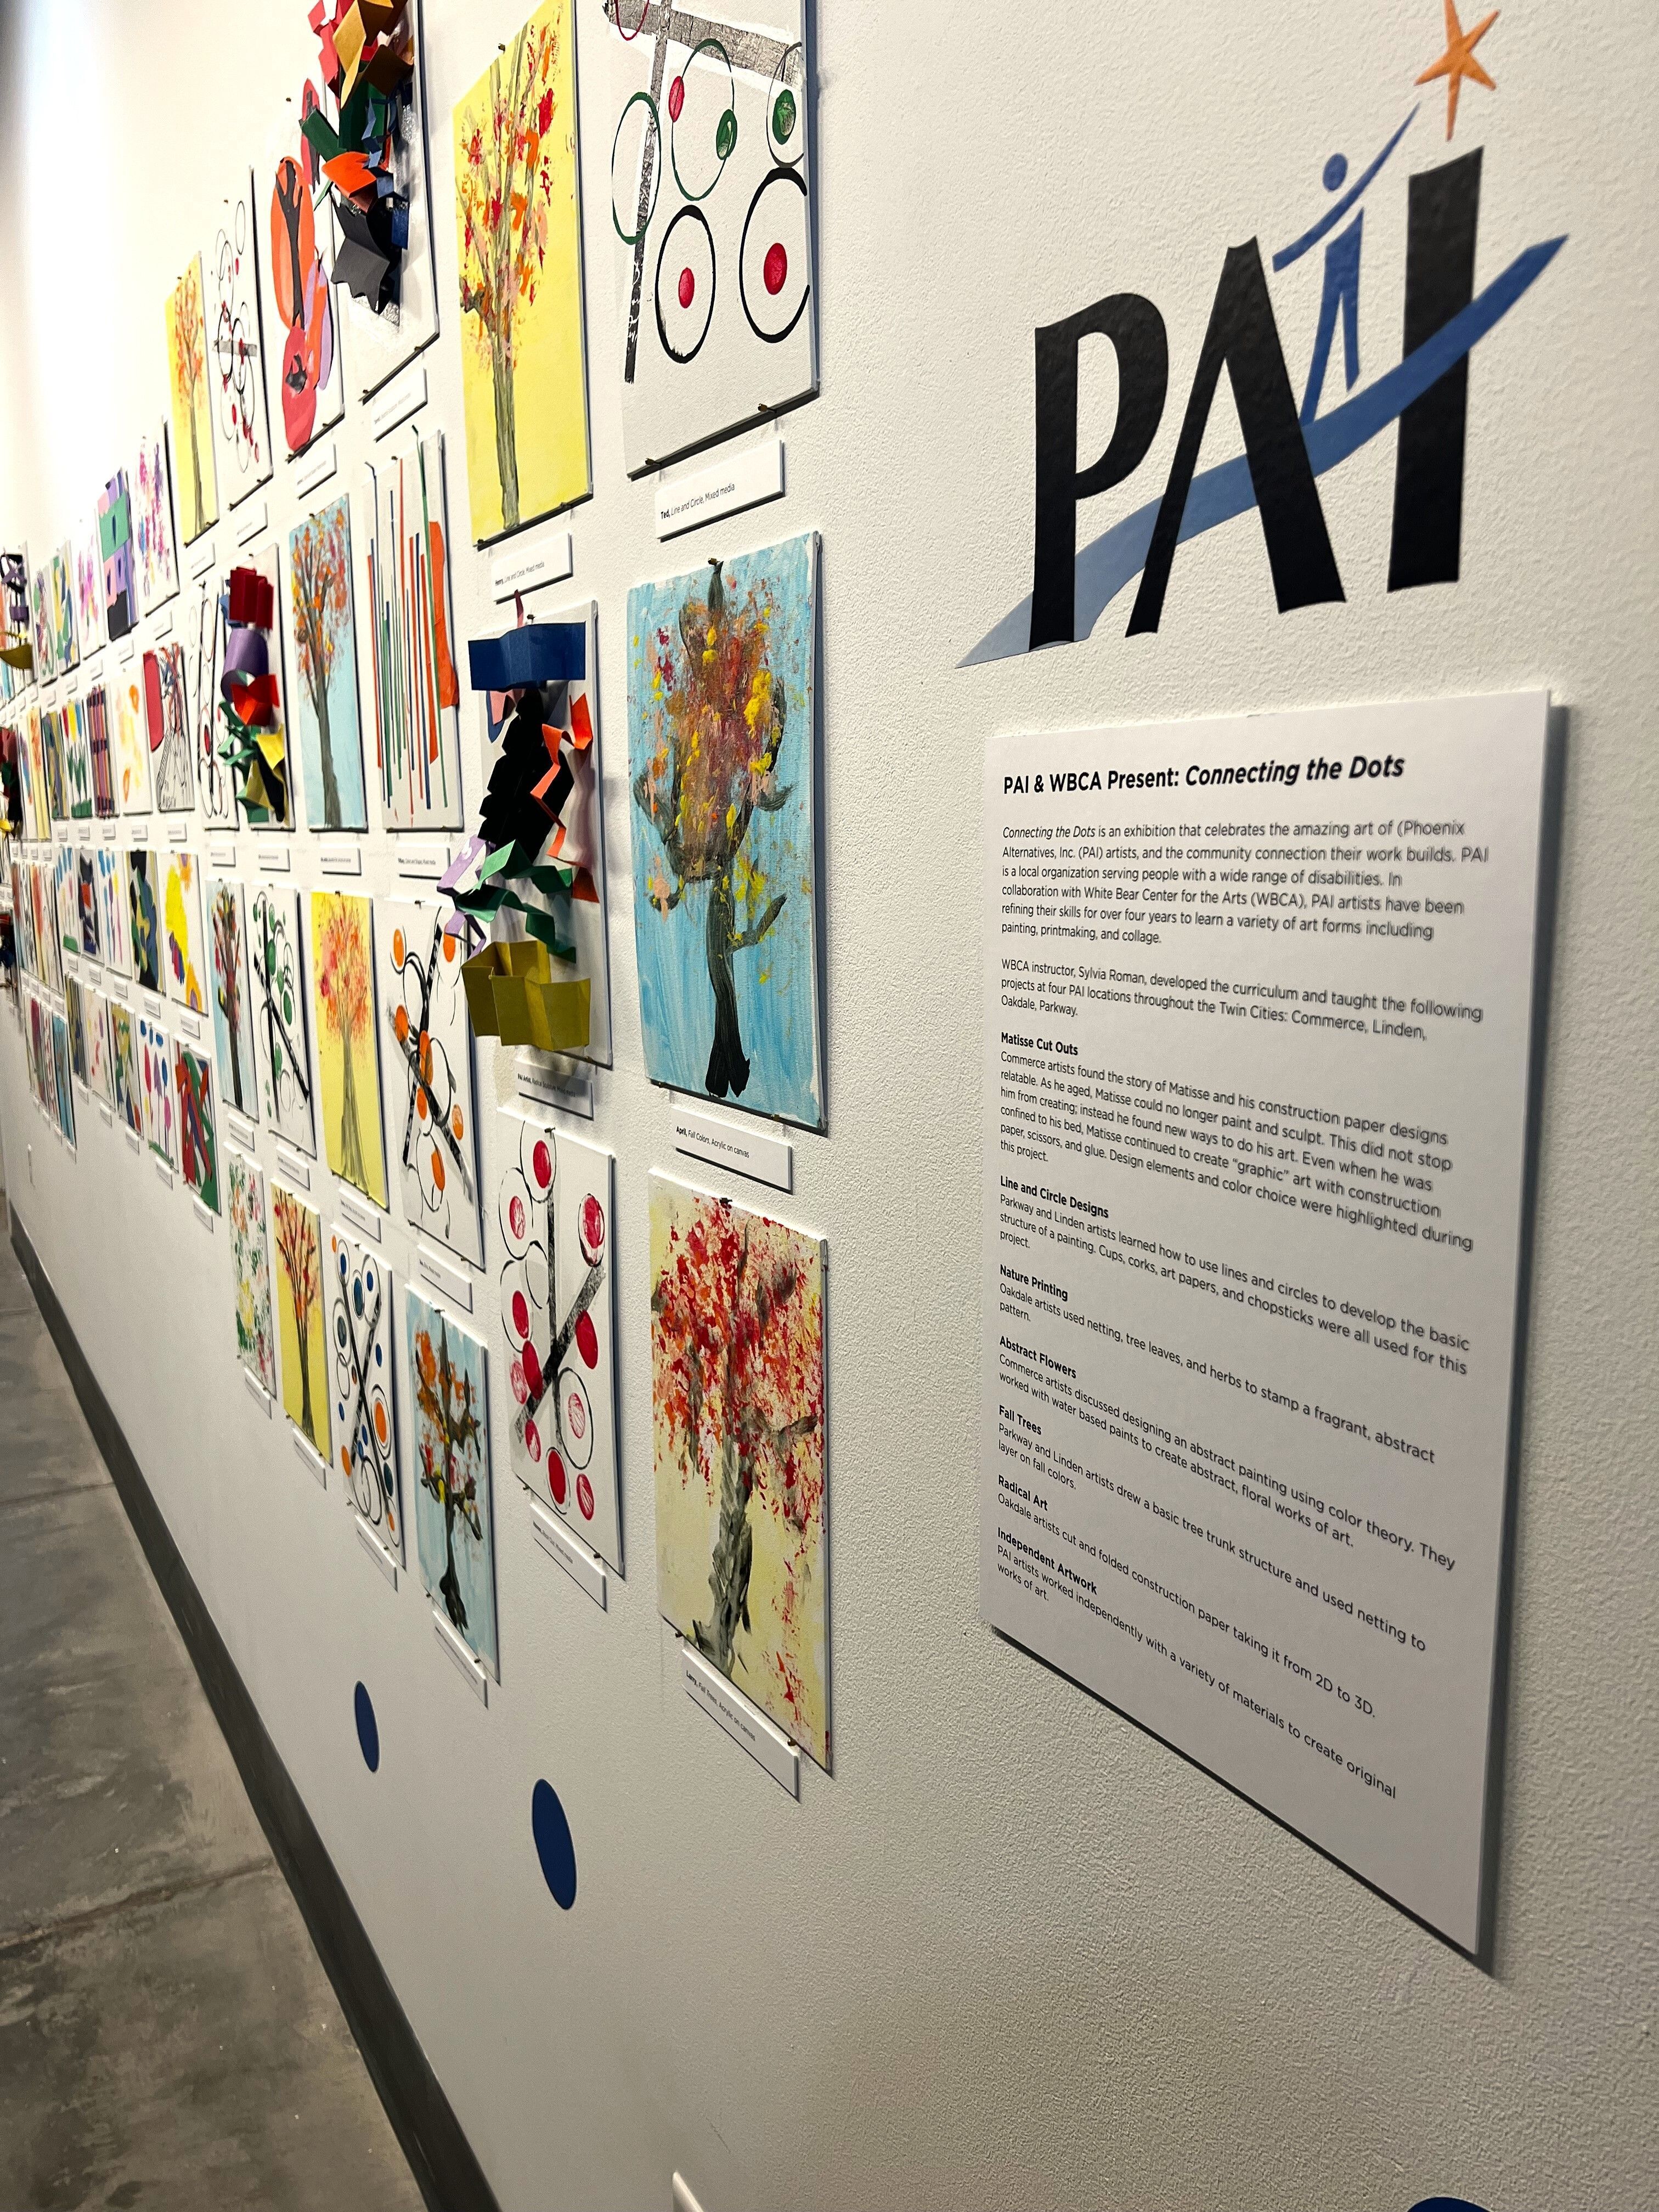 Local Gallery is Exhibiting PAI Art